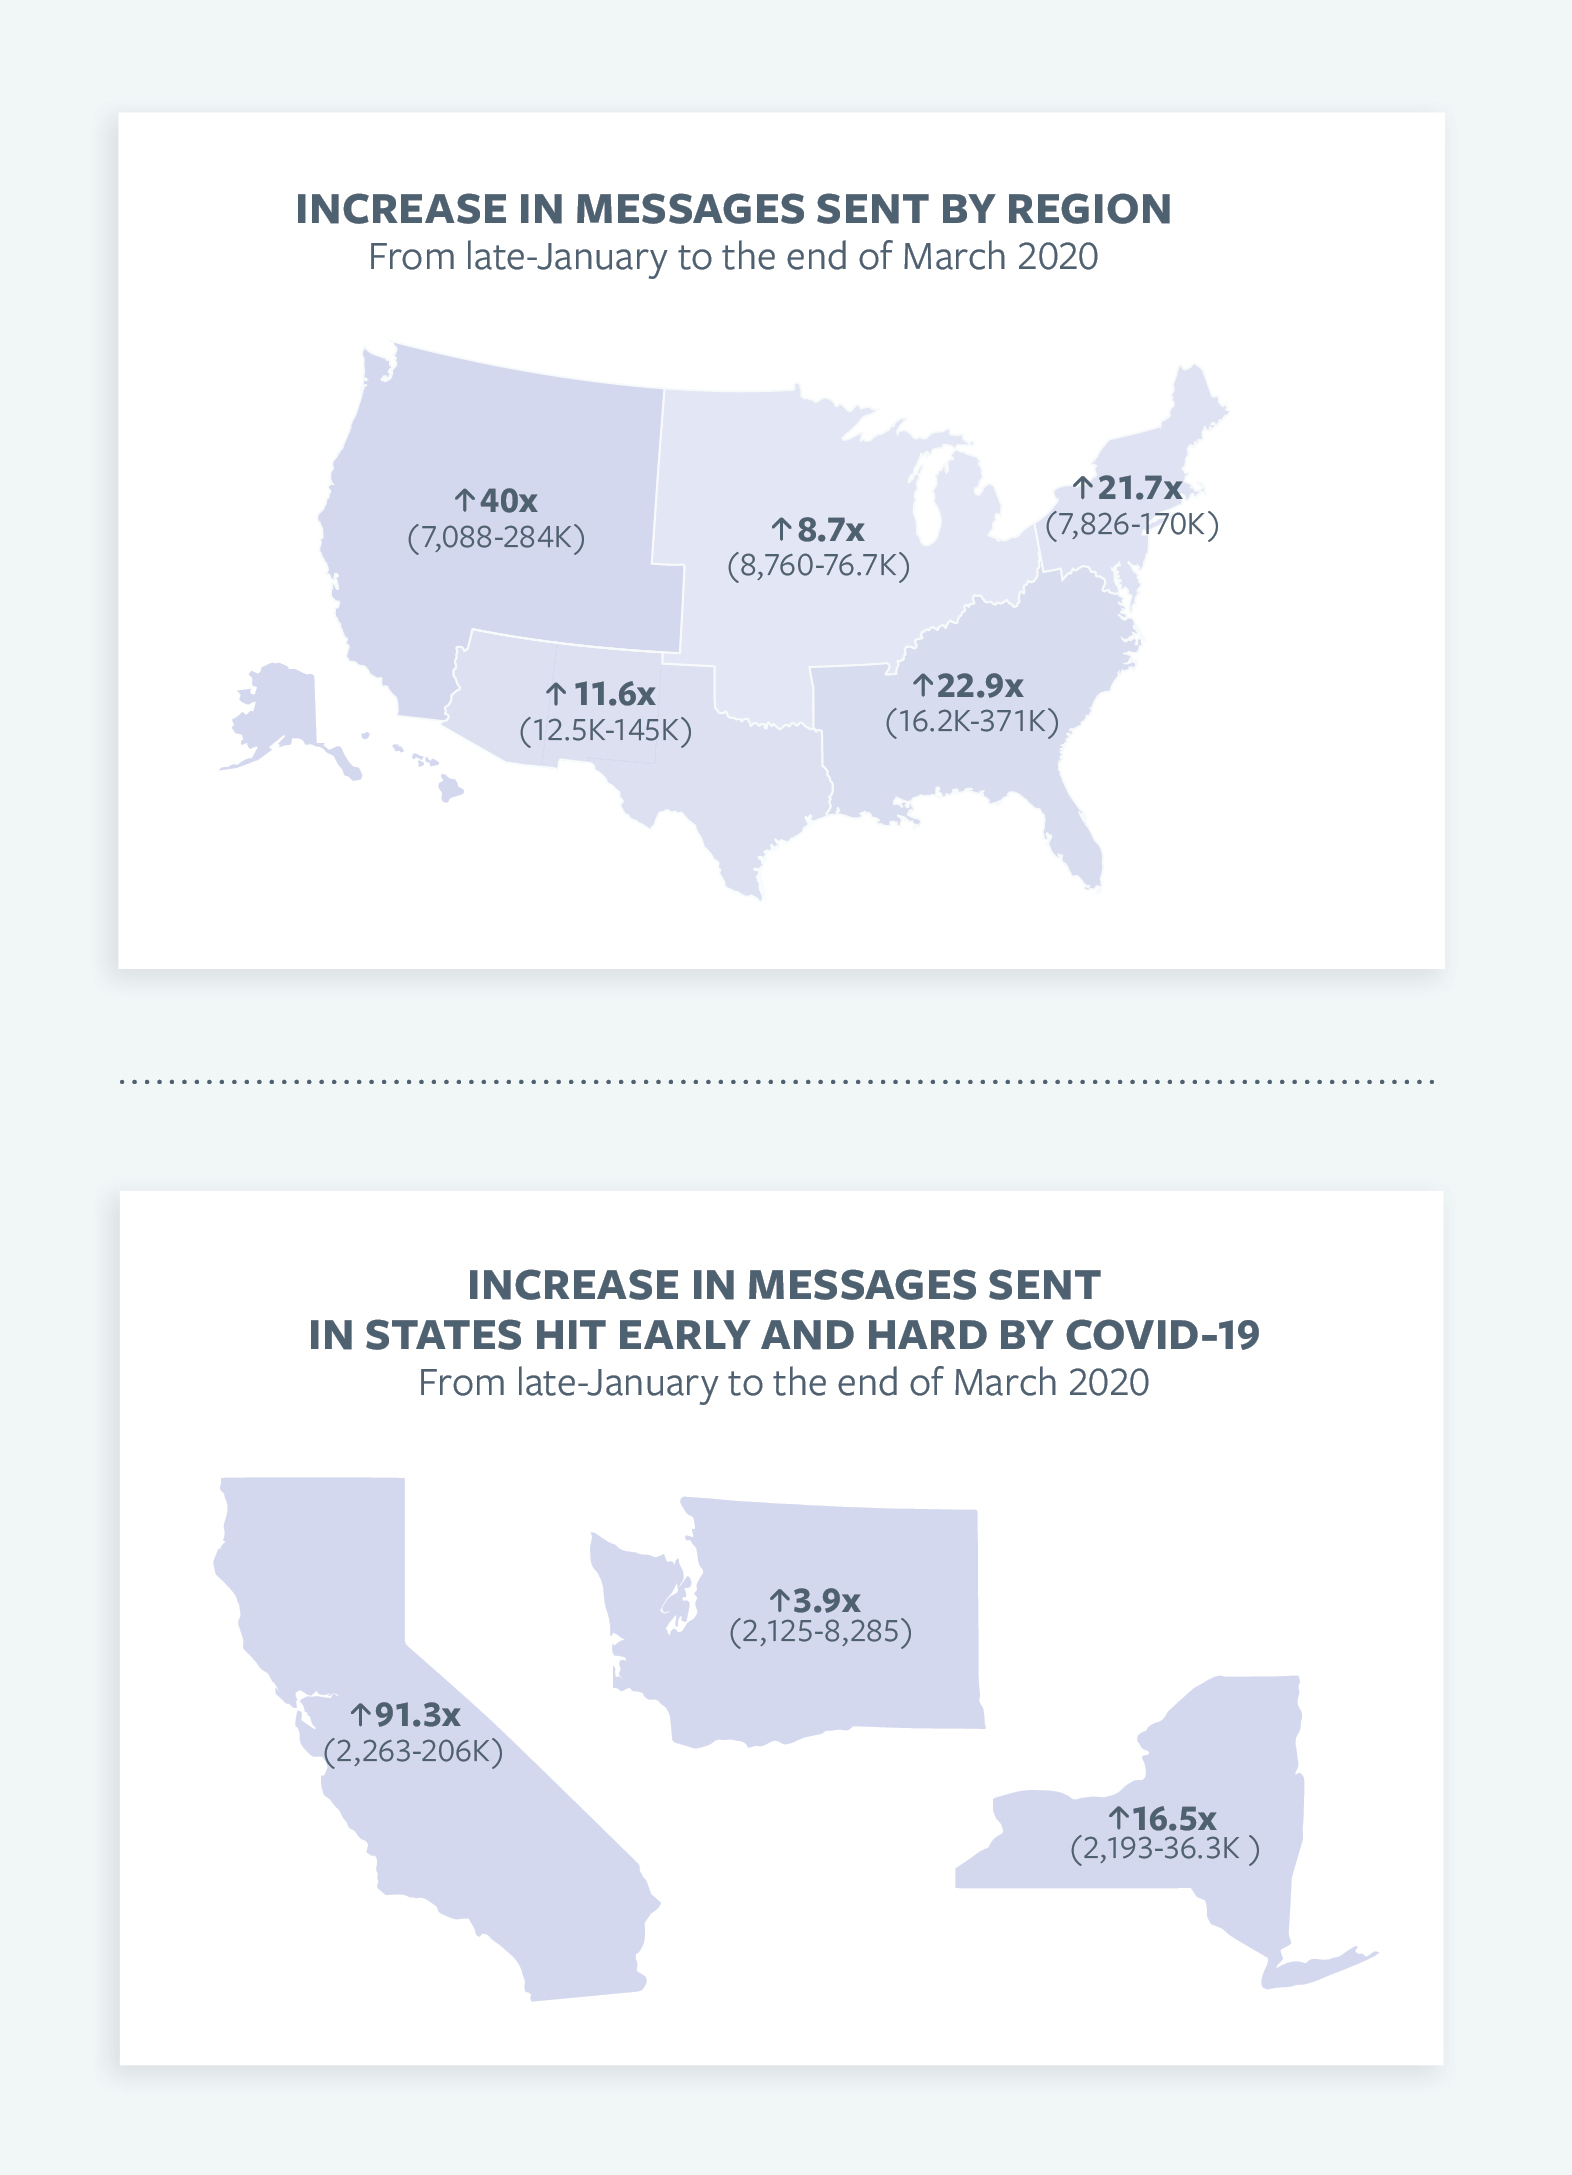 Graphic displaying increase in messages